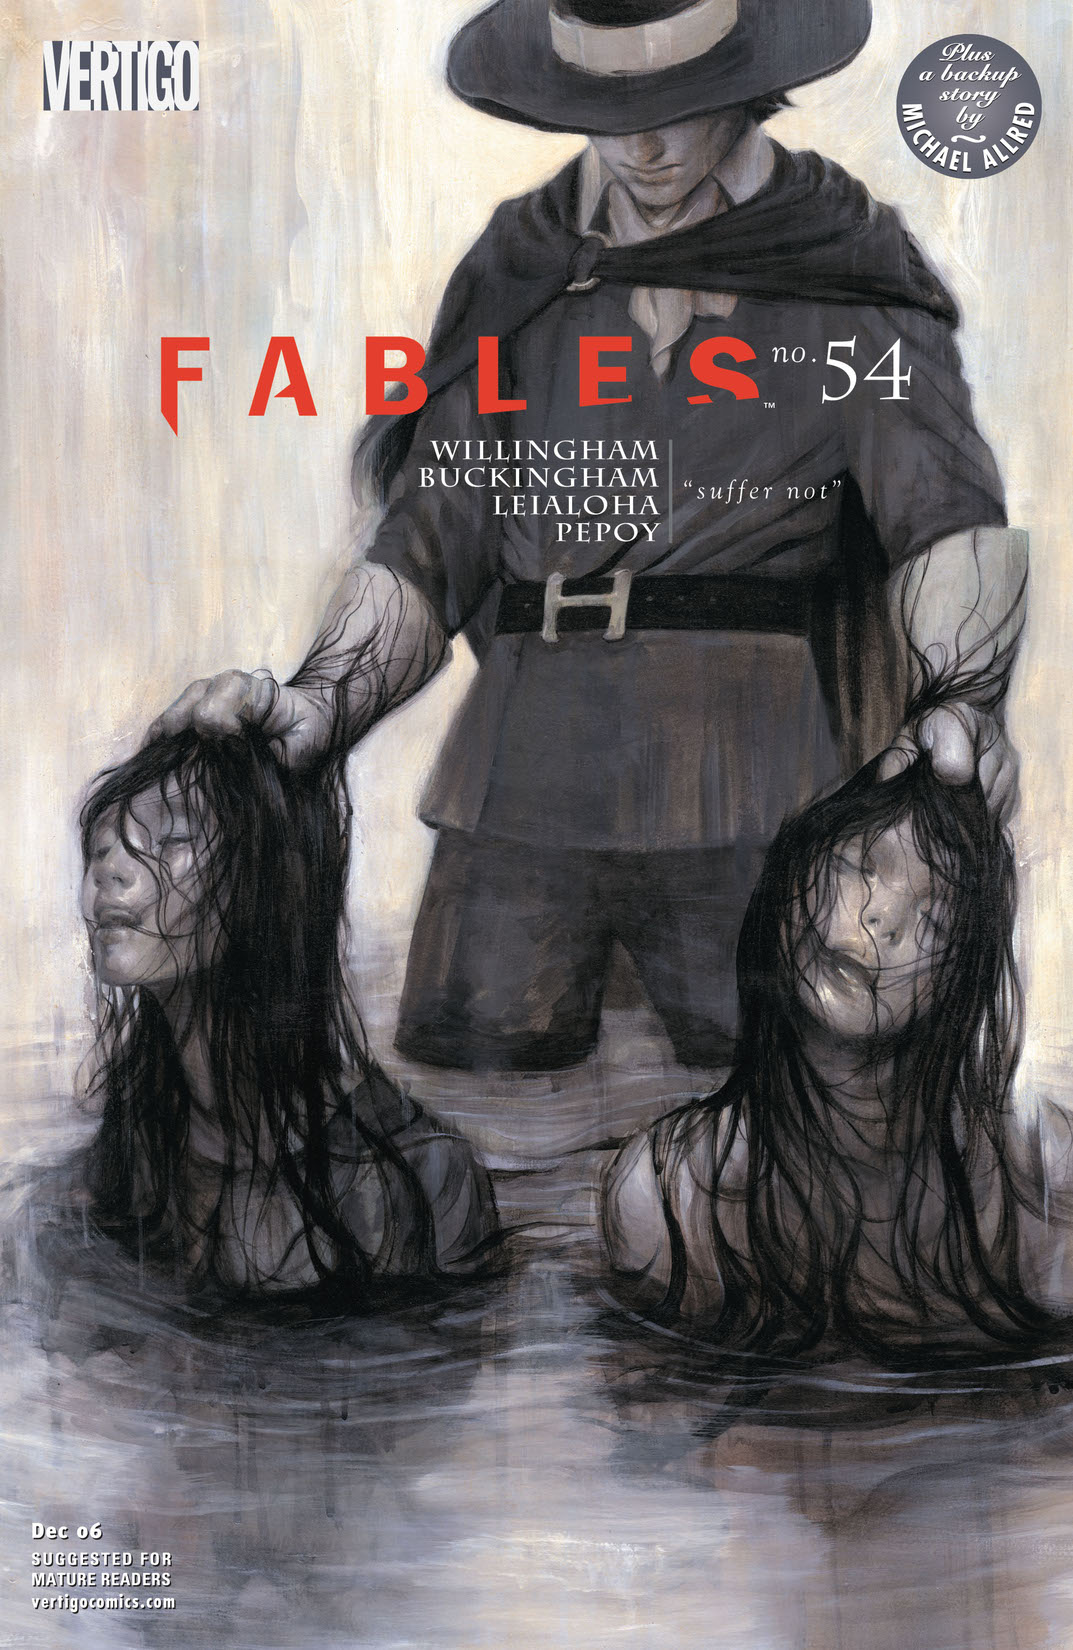 Fables #54 preview images